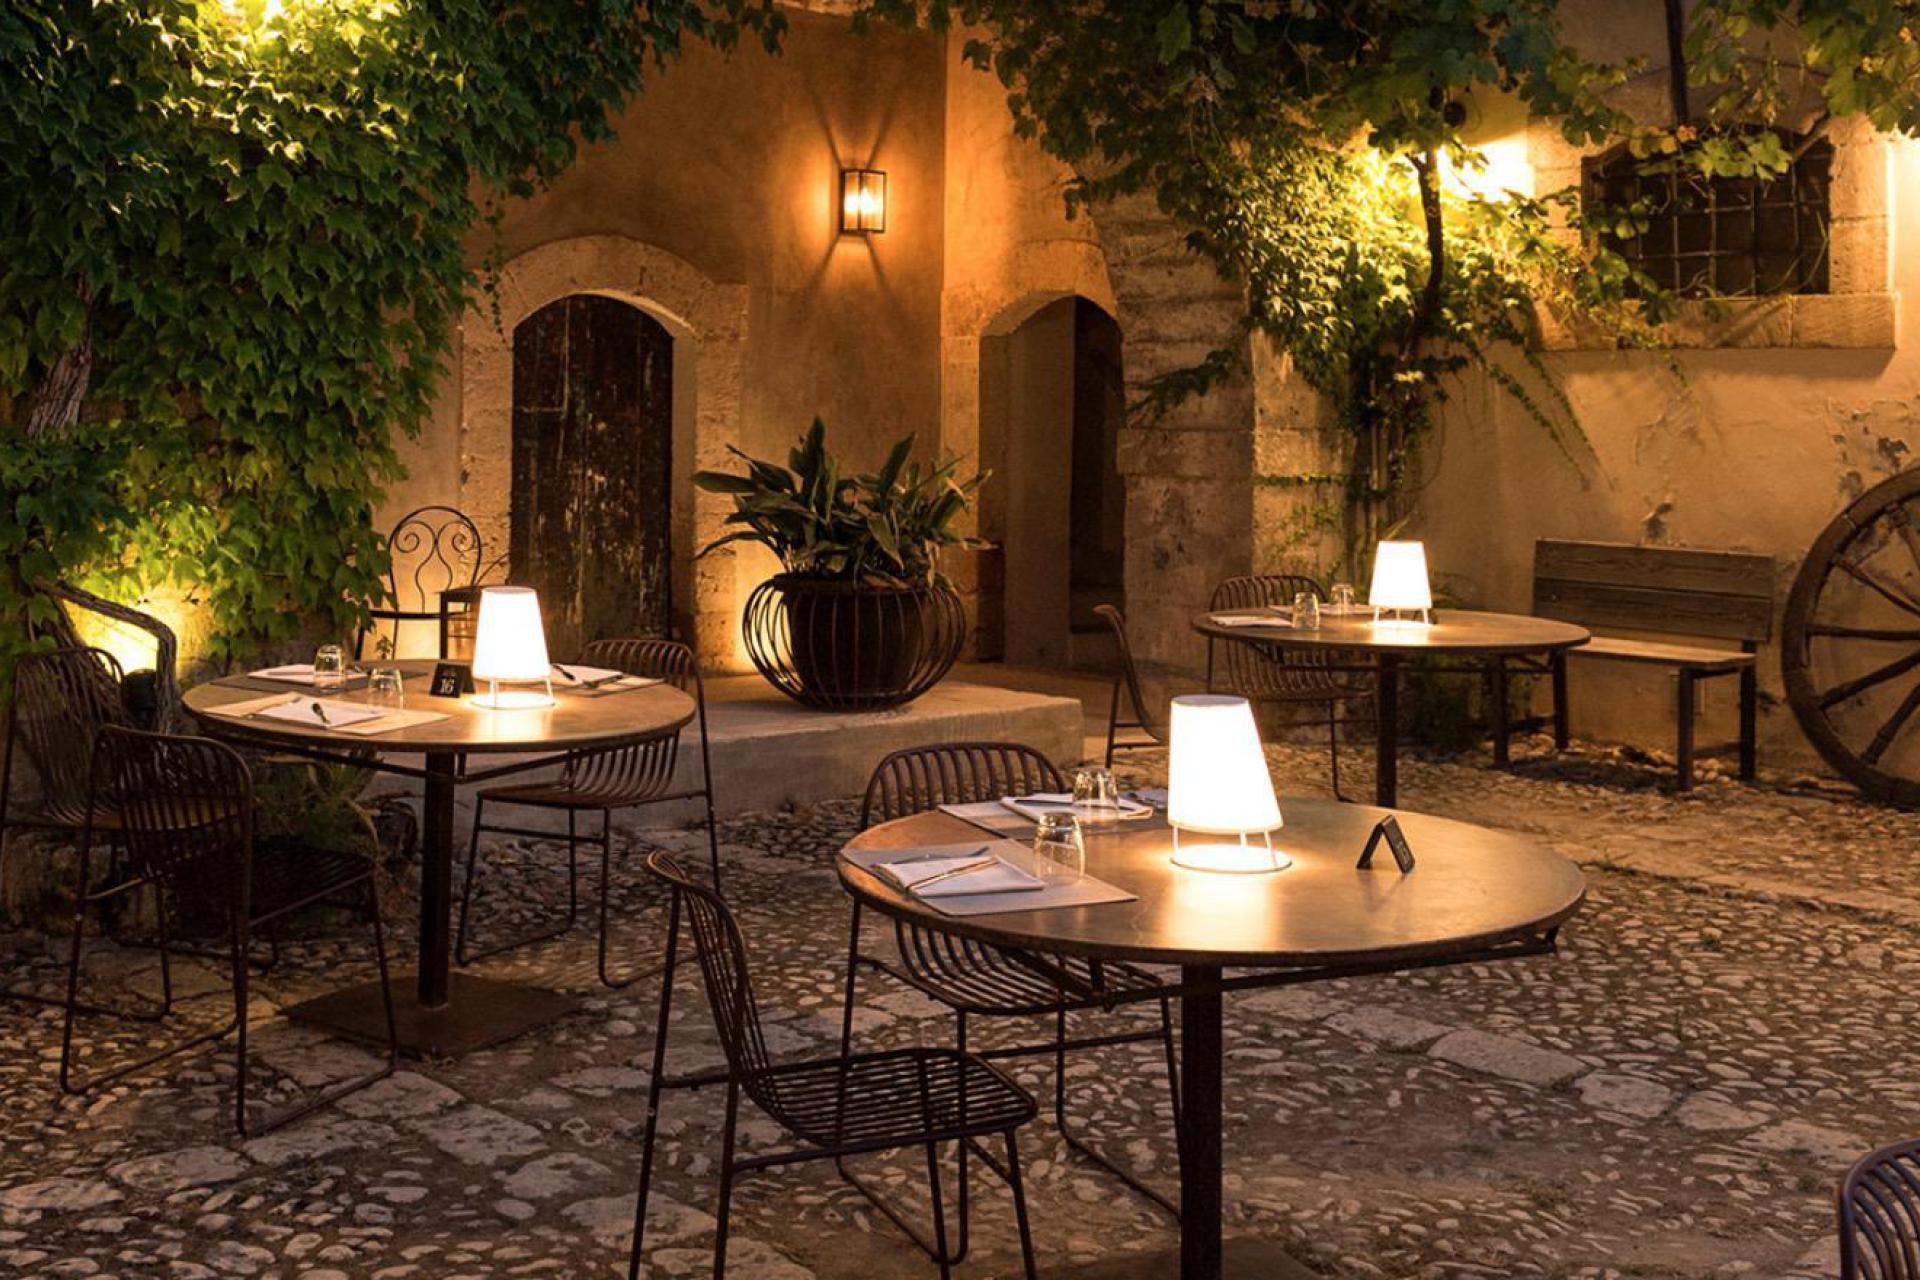 Authentic agriturismo with inner courtyard